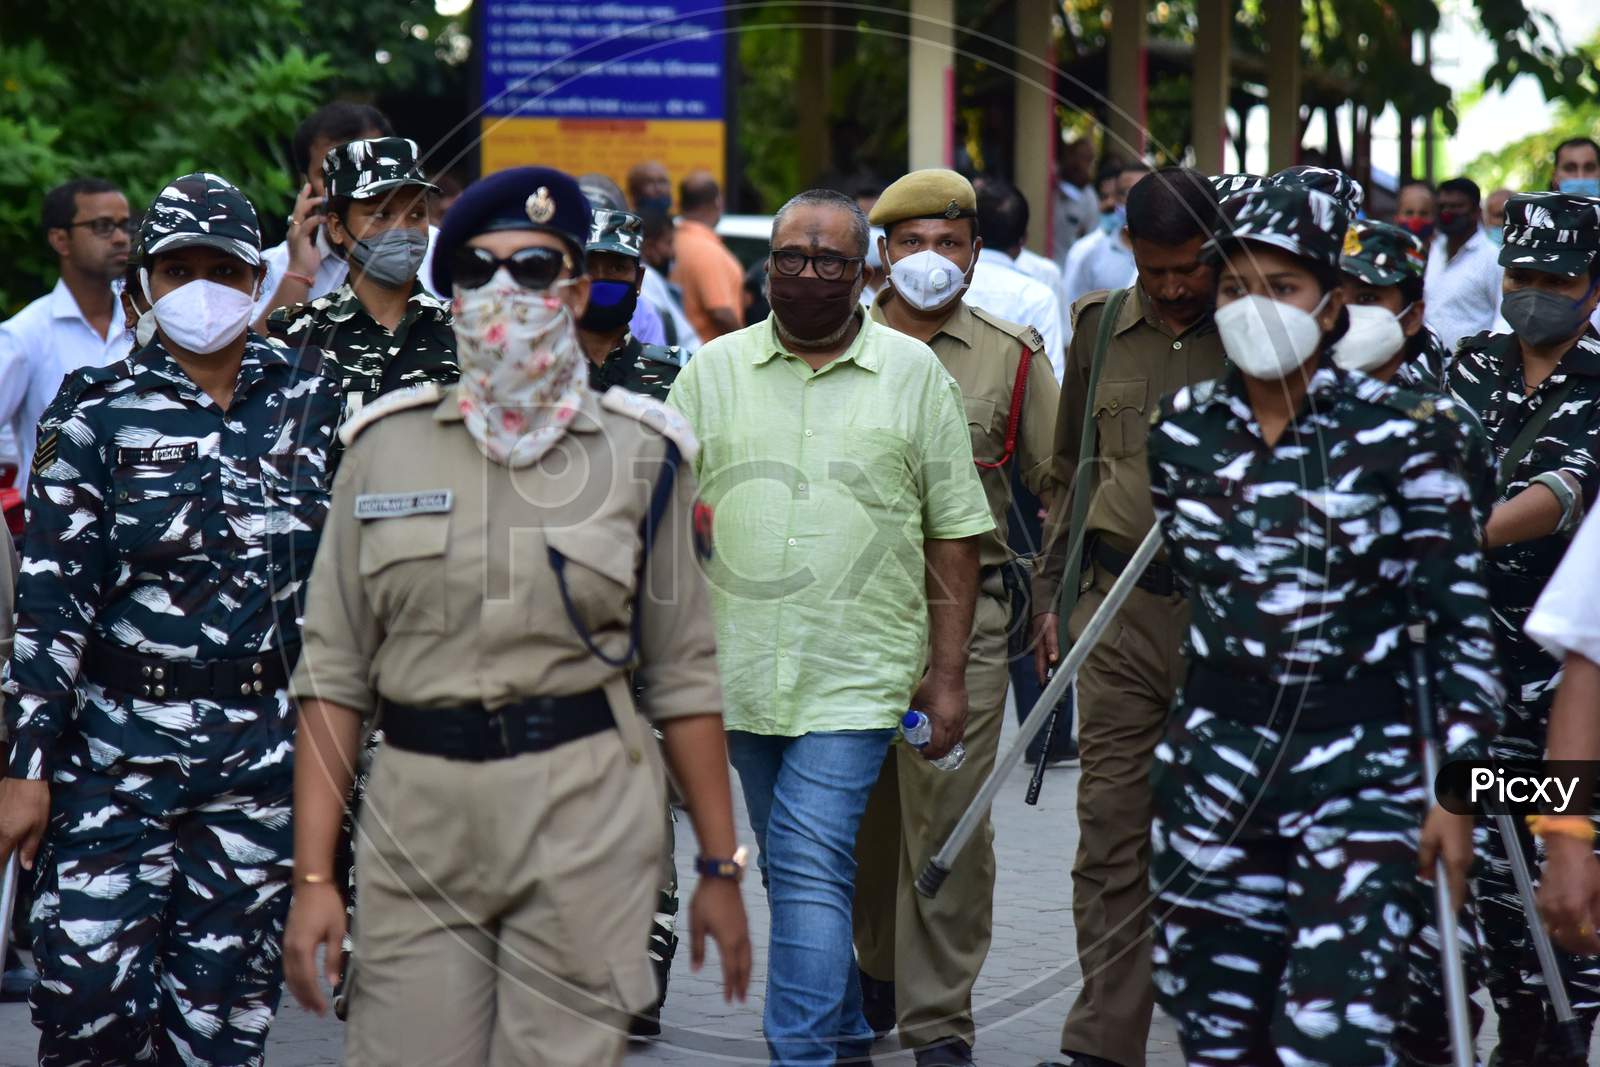 Retired Assam DIG PK Dutta, accused in the police recruitment examination paper leak scam  being produced to a court, in Guwahati on Oct 16,2020.